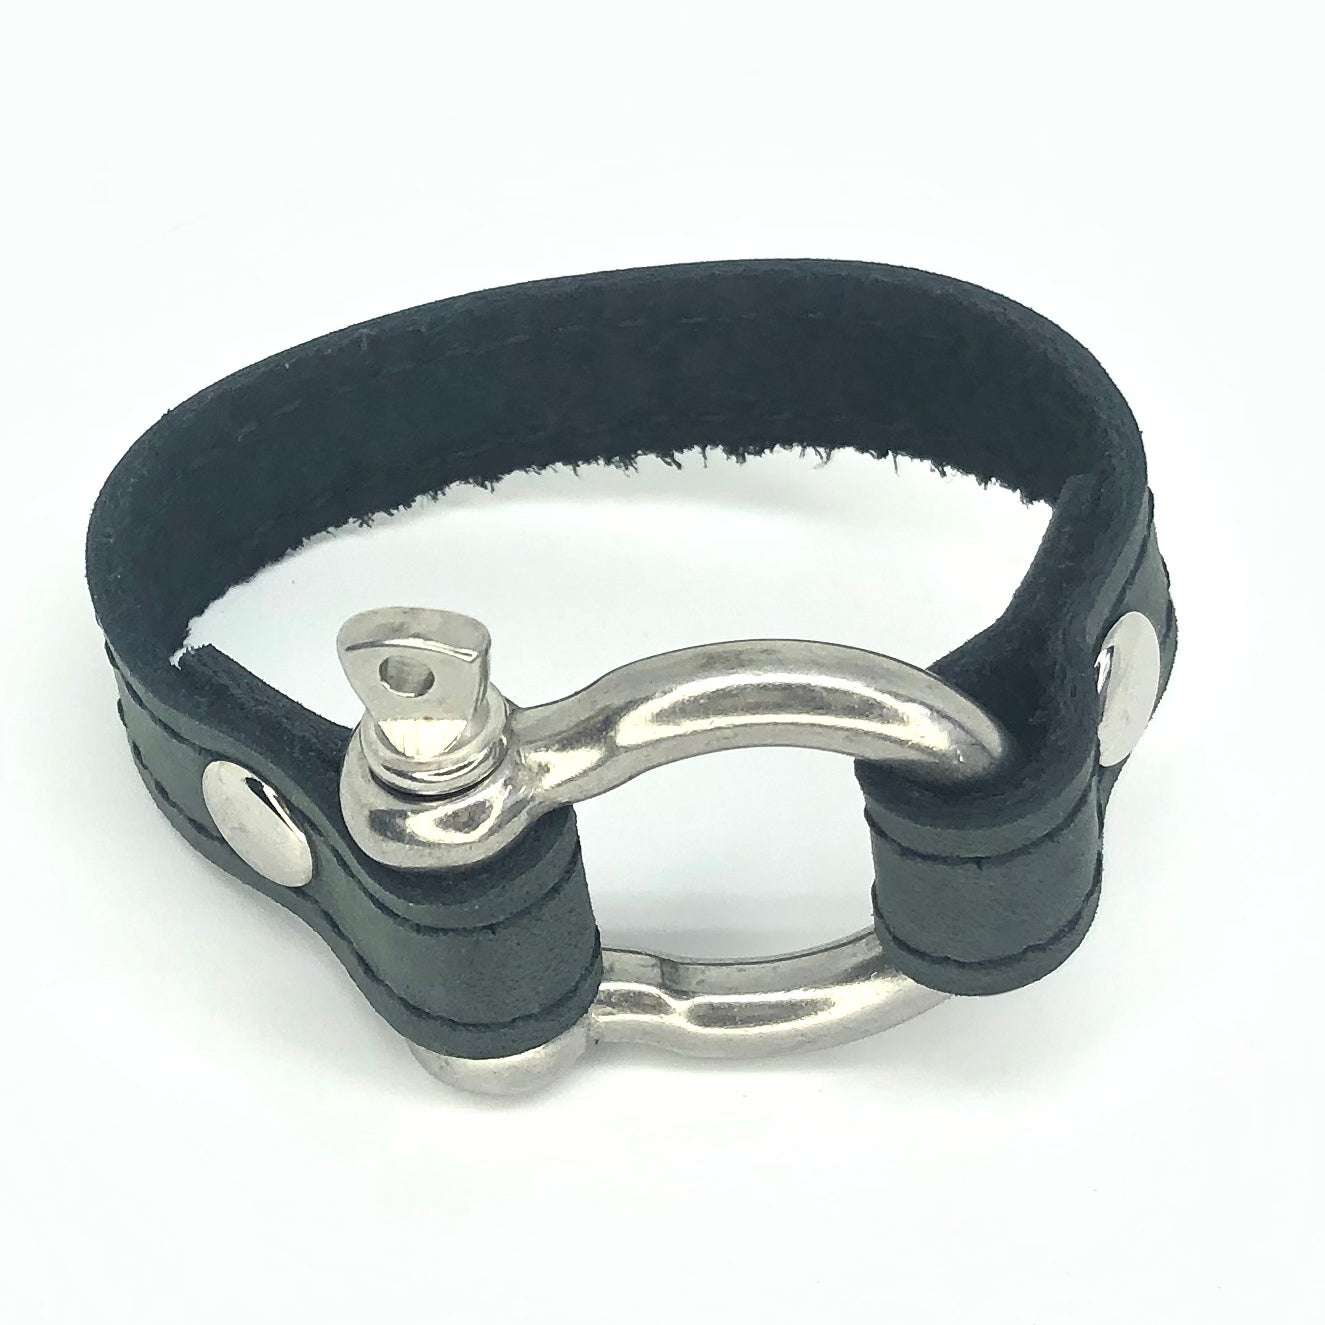 Signature bracelet with shackle by nyet jewelry